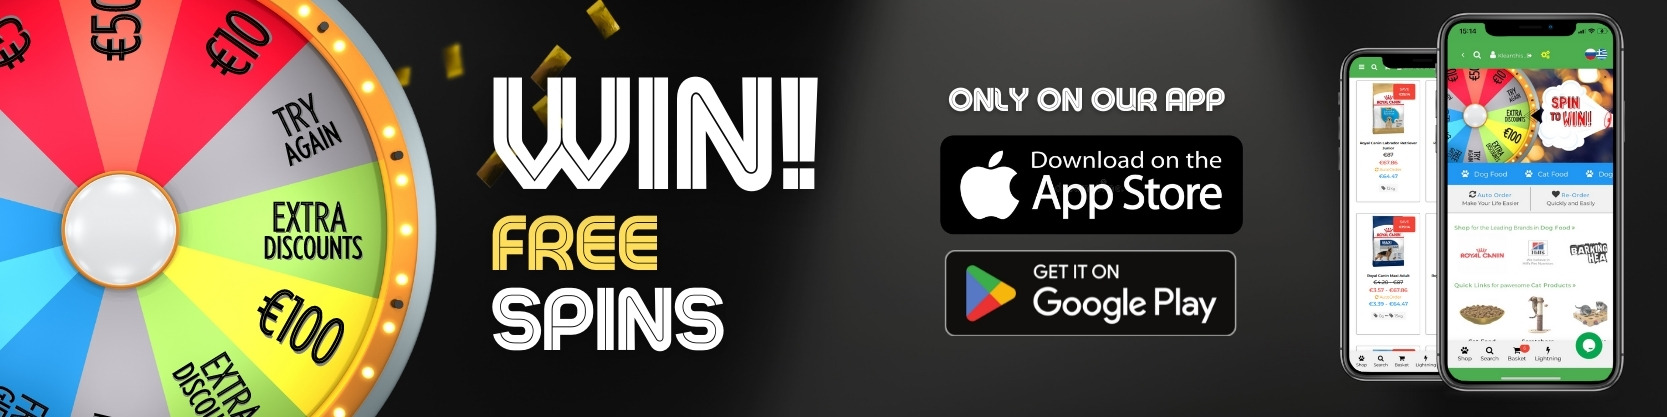 Download our App on the App Store & Google Play to WIN Spins Every Day